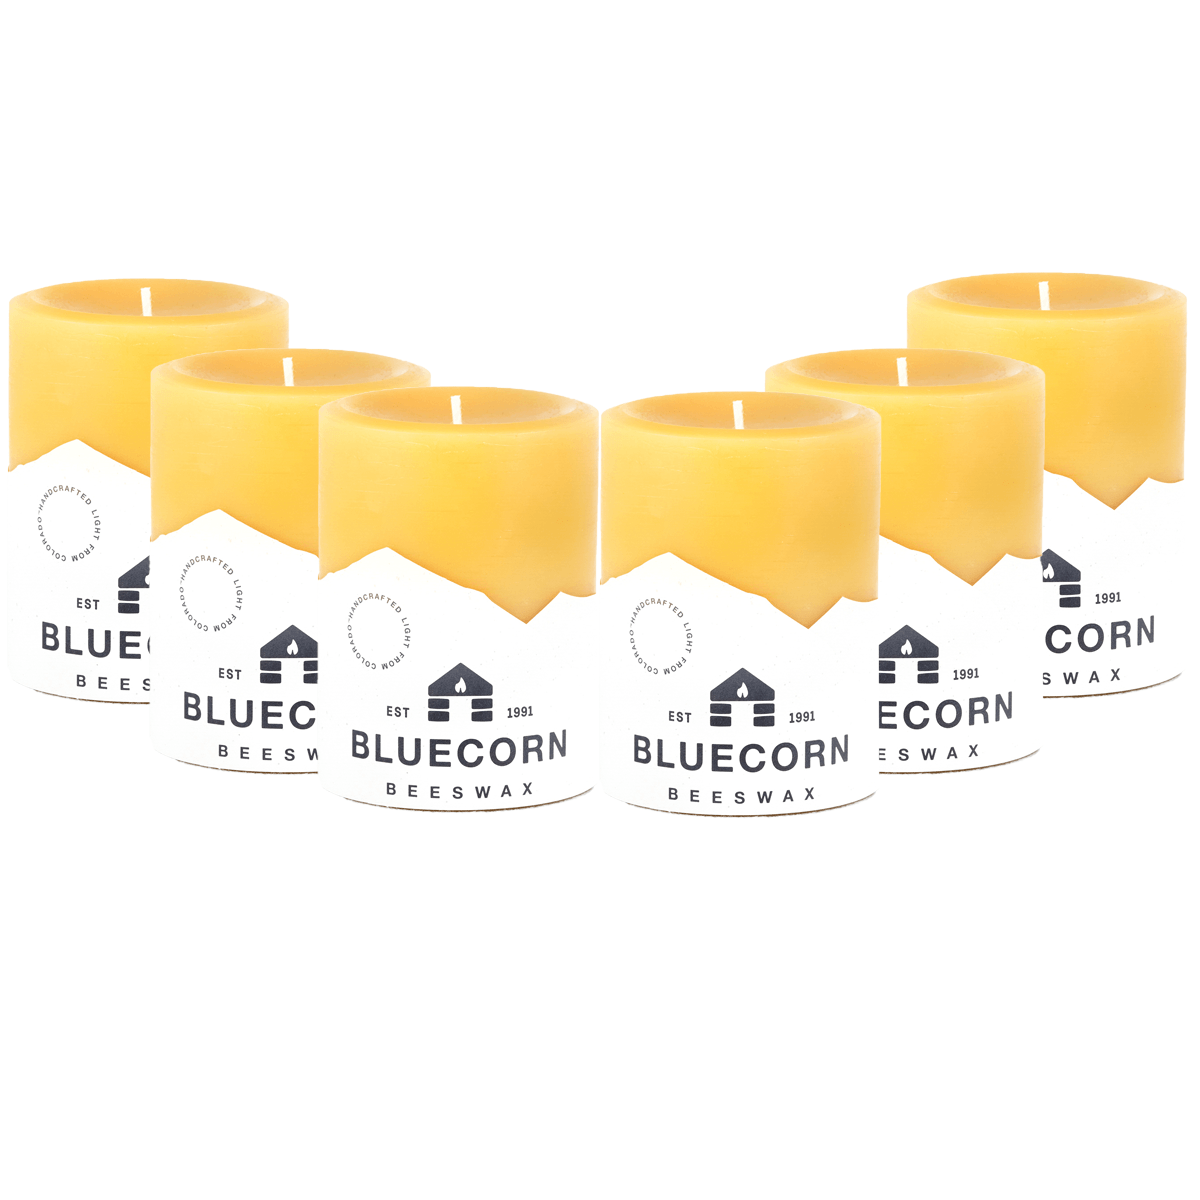  Bluecorn Beeswax 100% Pure Beeswax Tealight Candles, Natural  Beeswax Candles, Raw Yellow Tea Lights Candles, Long Burn (4-5 Hours), Soy, Paraffin, & Fragrance Free, 6-Pack